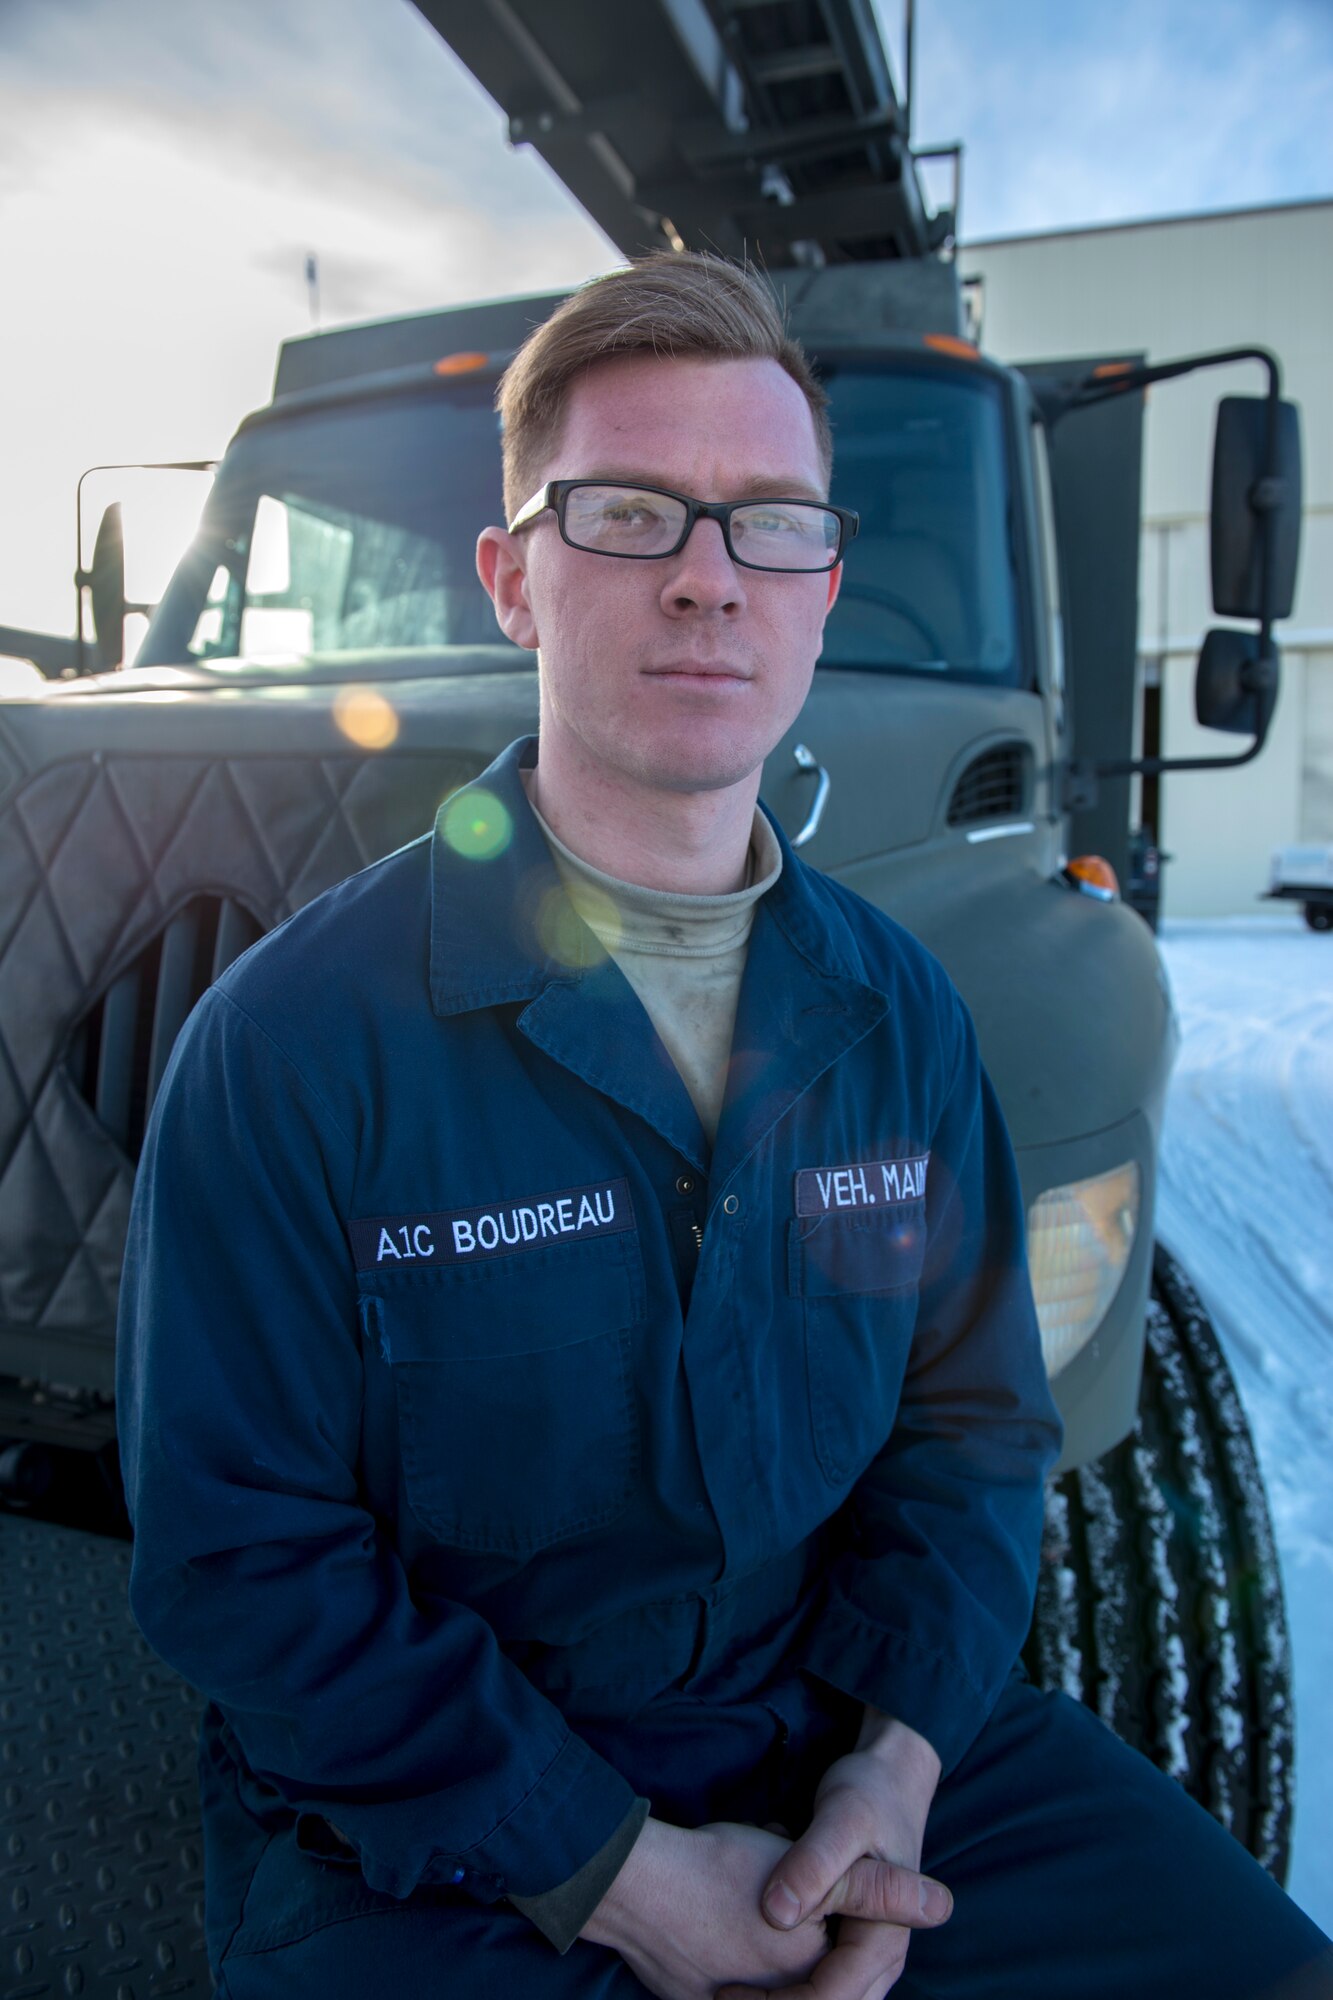 Airman 1st Class Craig Boudreau, a vehicle maintainer with the 673d Logistics Readiness Squadron, sits on an extended reach de-icer Feb. 27, 2018, at Joint Base Elmendorf-Richardson, Alaska. Boudreau was handpicked to travel with an extended-reach deicer from JBER, Alaska, to Gangneung Air Base, Republic of Korea, in support of Vice President of the United States Michael Pence’s visit to the Pyeongchang 2018 Winter Olympics.